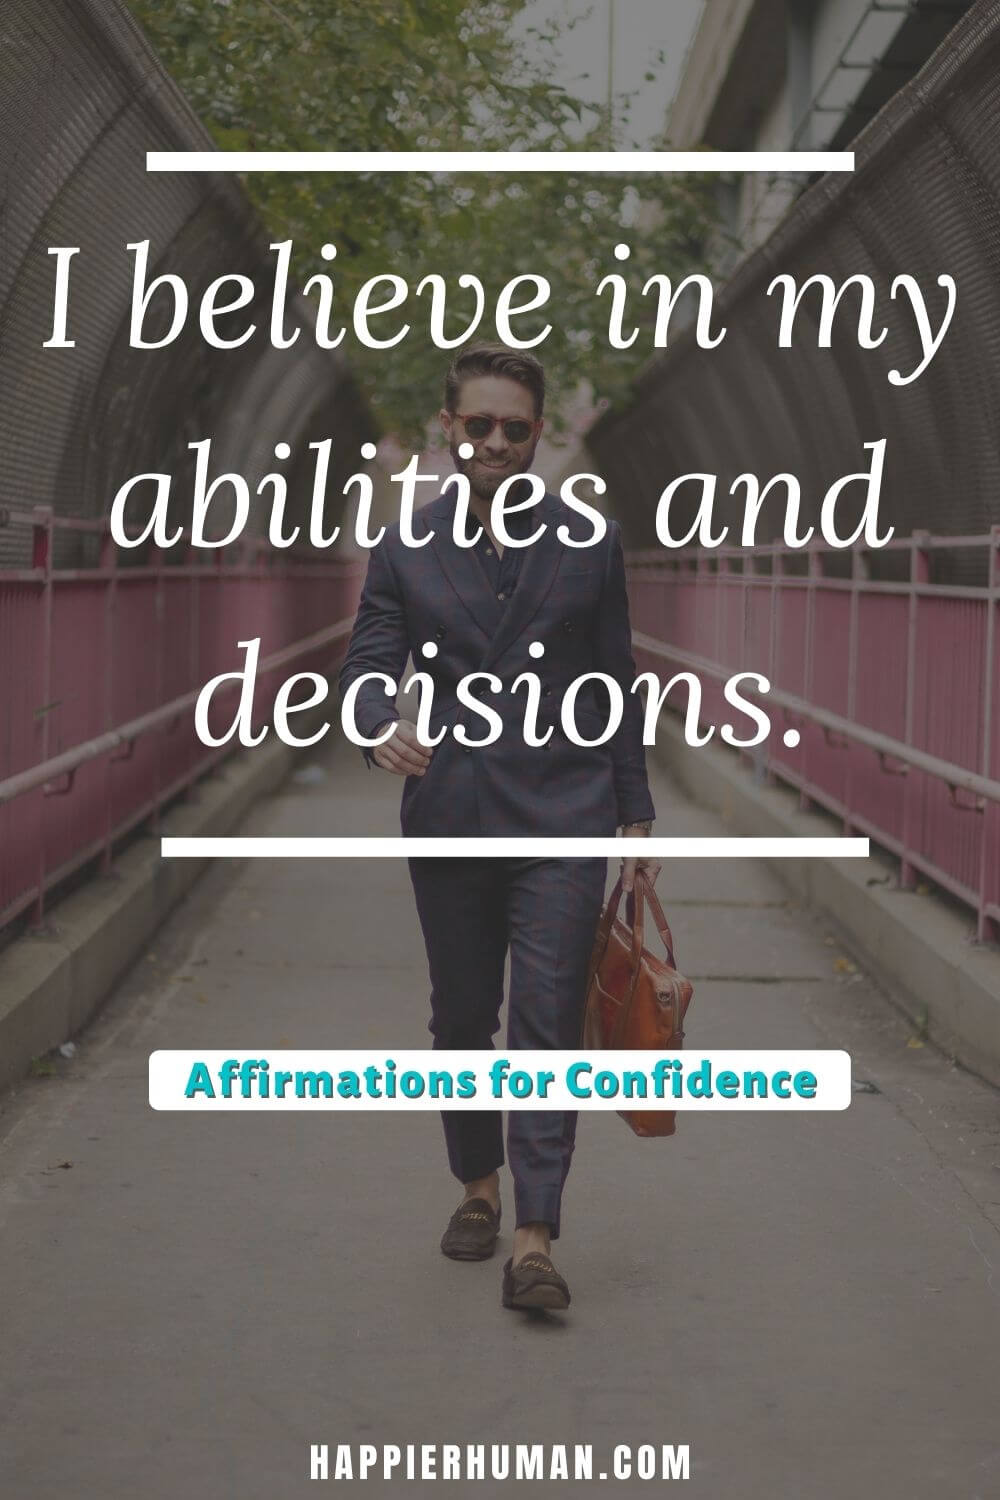 Affirmations for Confidence - I believe in my abilities and decisions. | biblical affirmations for confidence | spiritual affirmations for confidence | sleep affirmations for confidence #morningaffirmations #selfimprovement #love